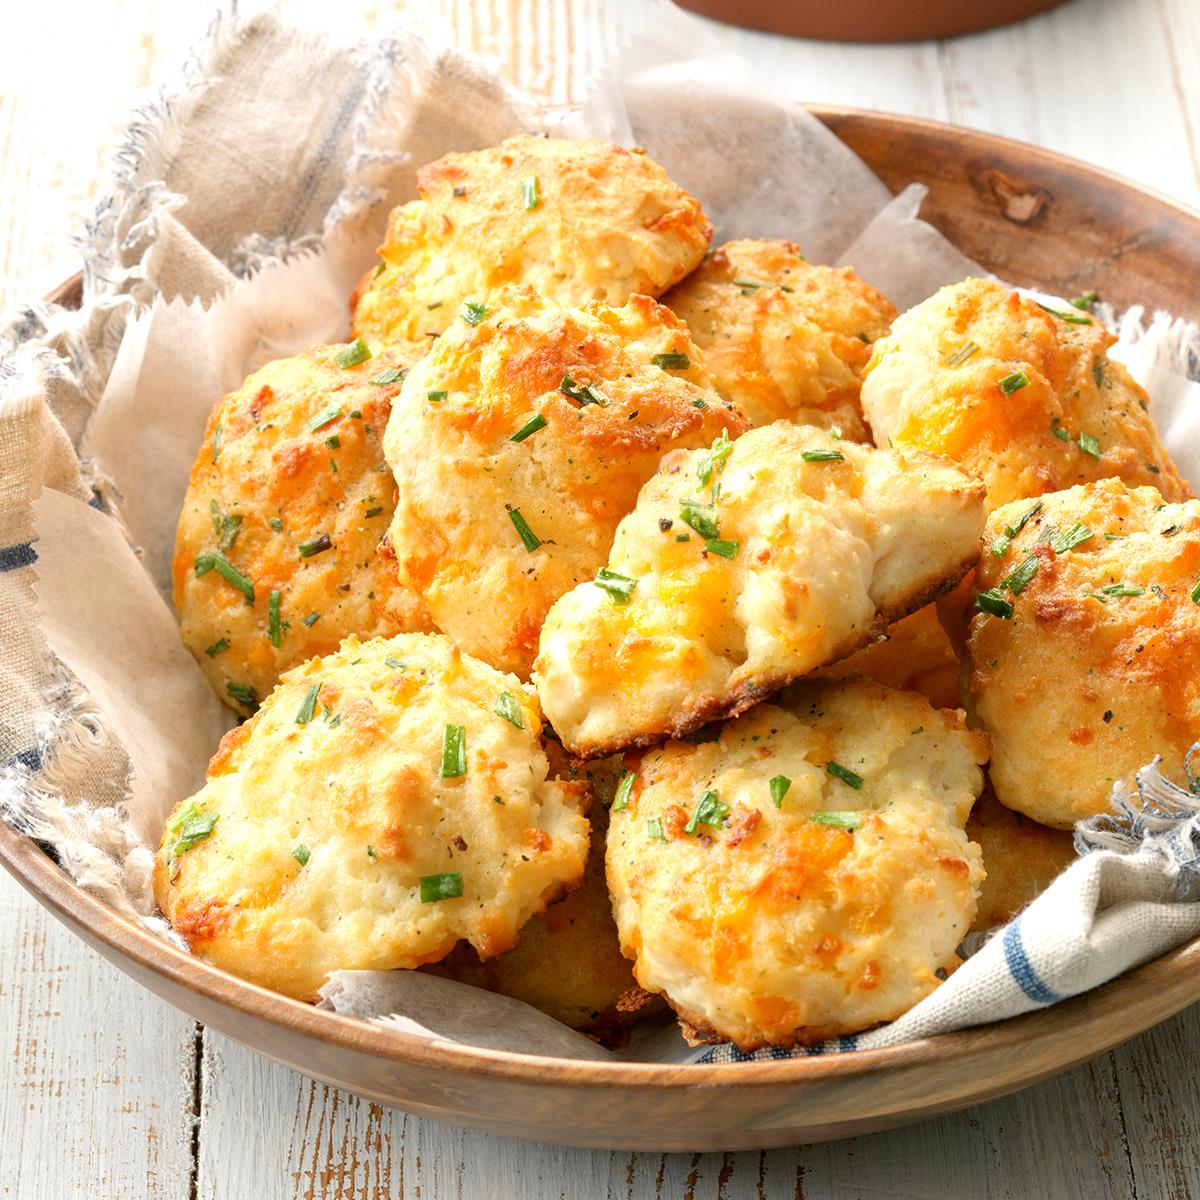 Image of 8 garlic cheese biscuits in a brown bowl over a napkin.